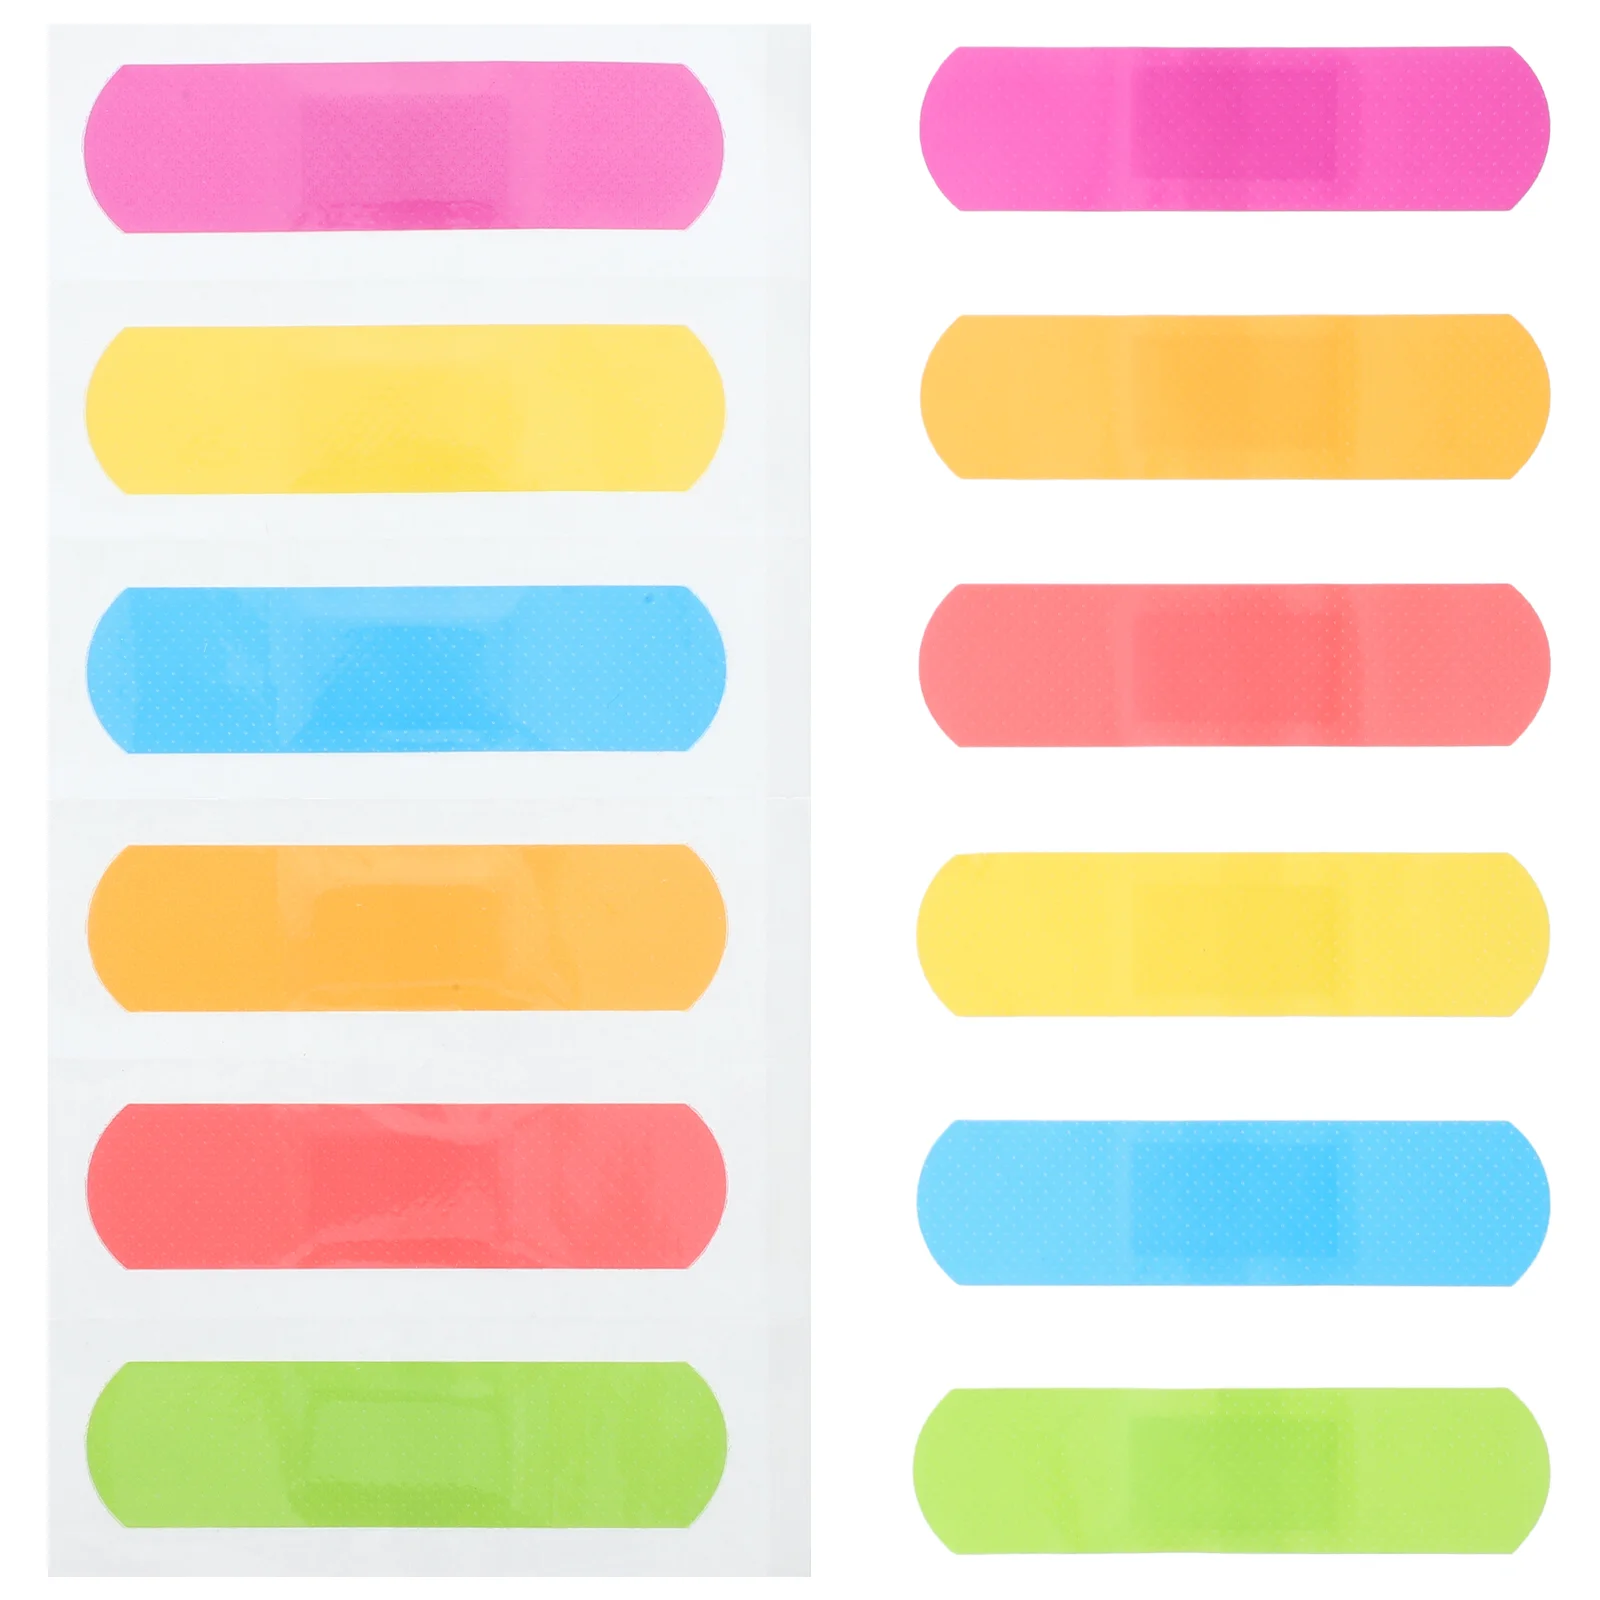 

60 Pcs Colorful Cartoon Bandage Wound Care Patches for Elasticity Lovely Bandages Small Wounds Hemostatic First Aids Child